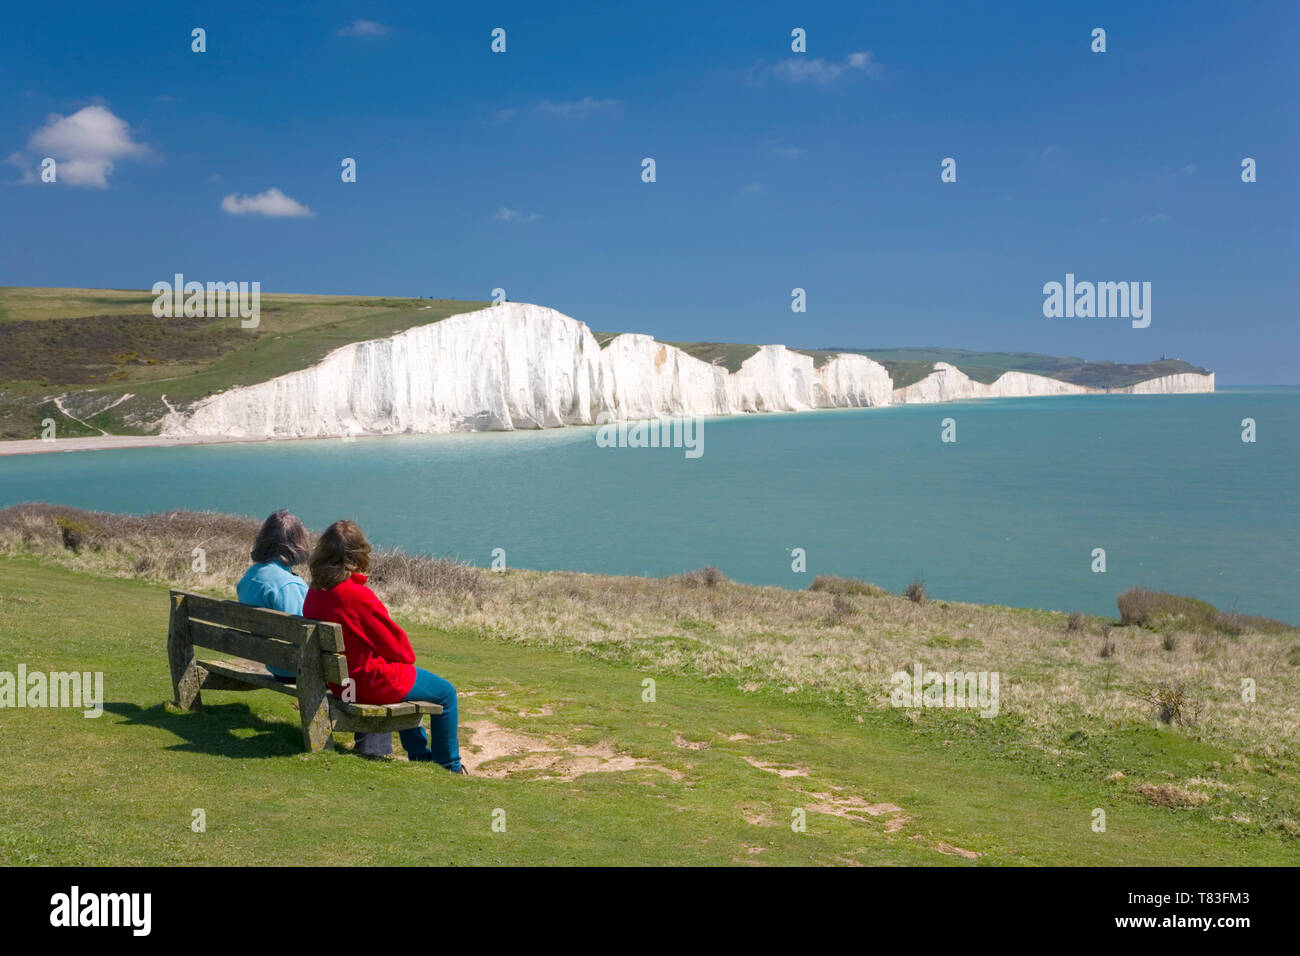 Cuckmere Haven, East Sussex, England. Visitors on bench admiring view across the bay from Seaford Head to the Seven Sisters cliffs. Stock Photo